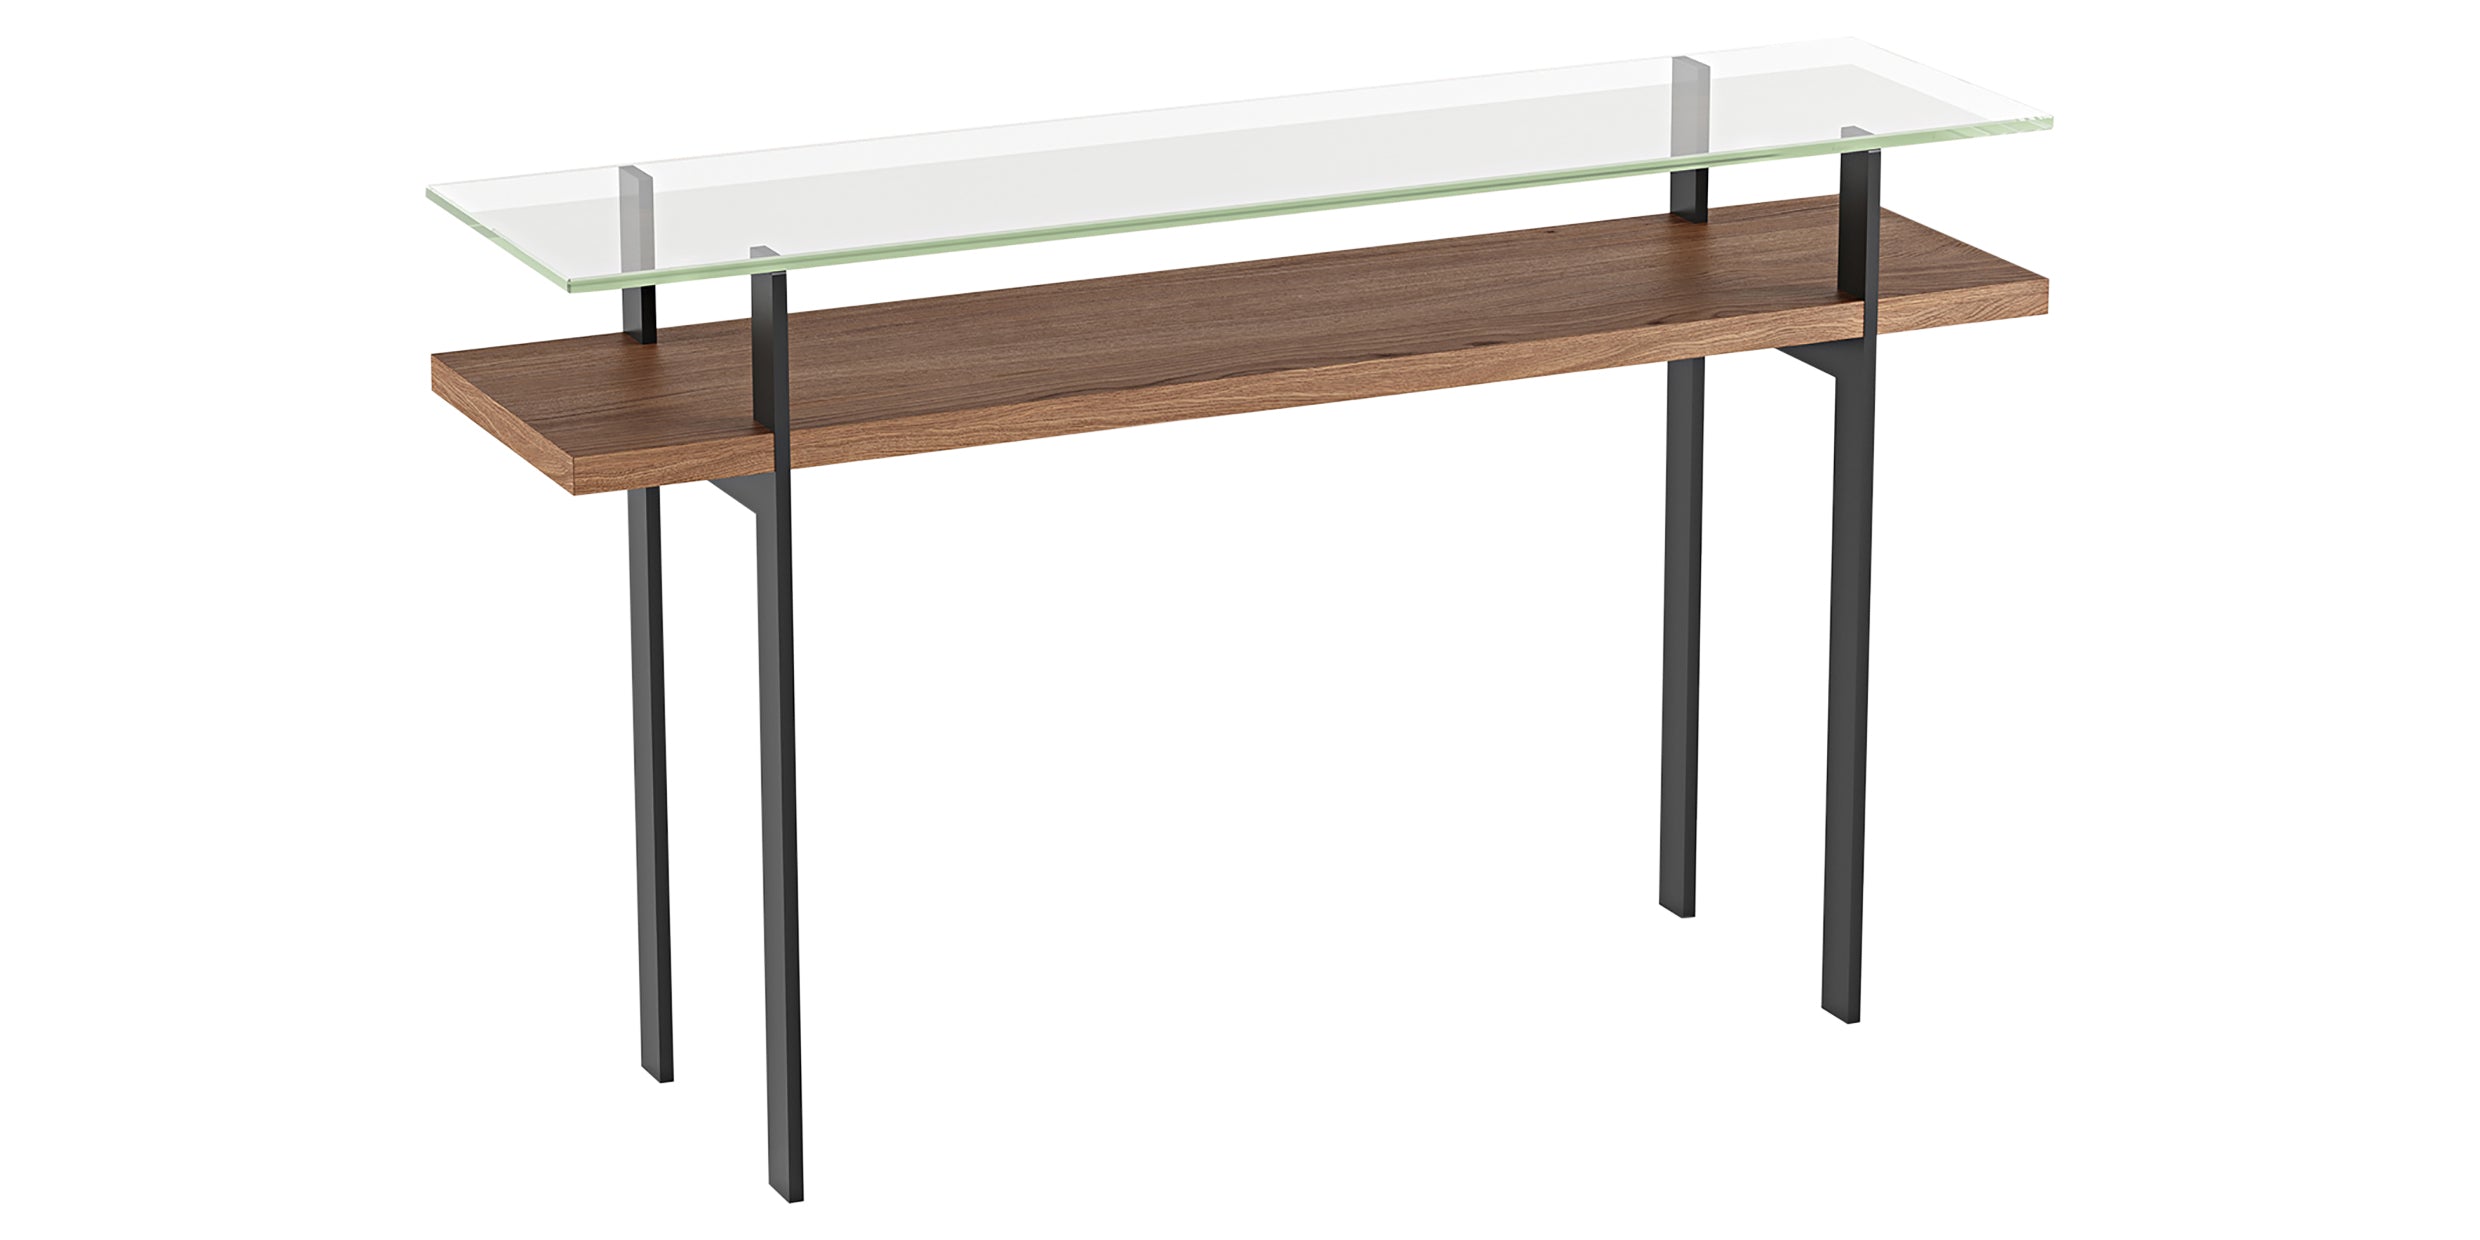 Natural Walnut Veneer &amp; Polished Tempered Glass with Black Steel | BDI Terrace Slim Console Table | Valley Ridge Furniture